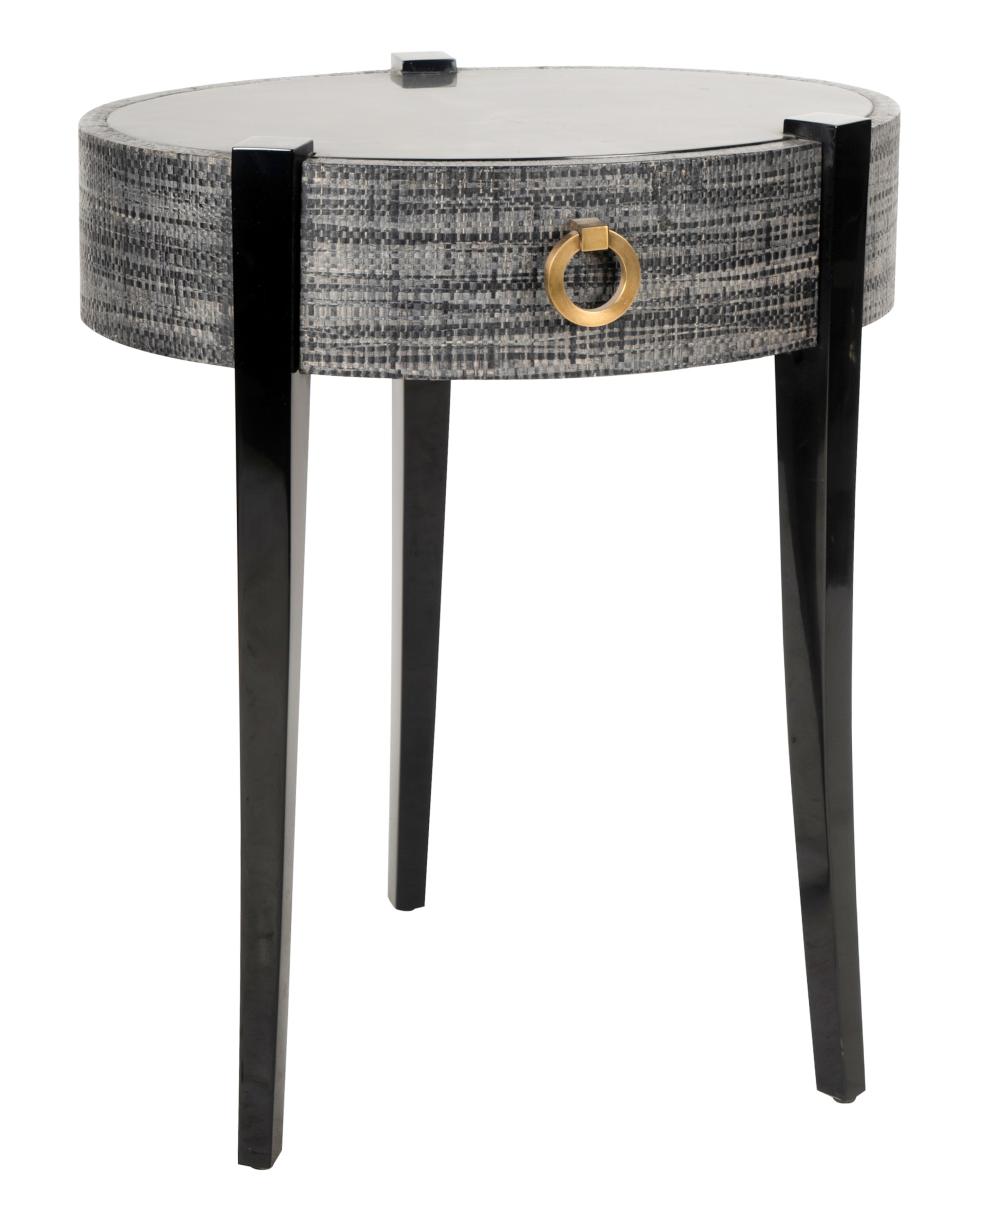 RAFFIA-CLAD OVAL COCKTAIL TABLEcontemporary;